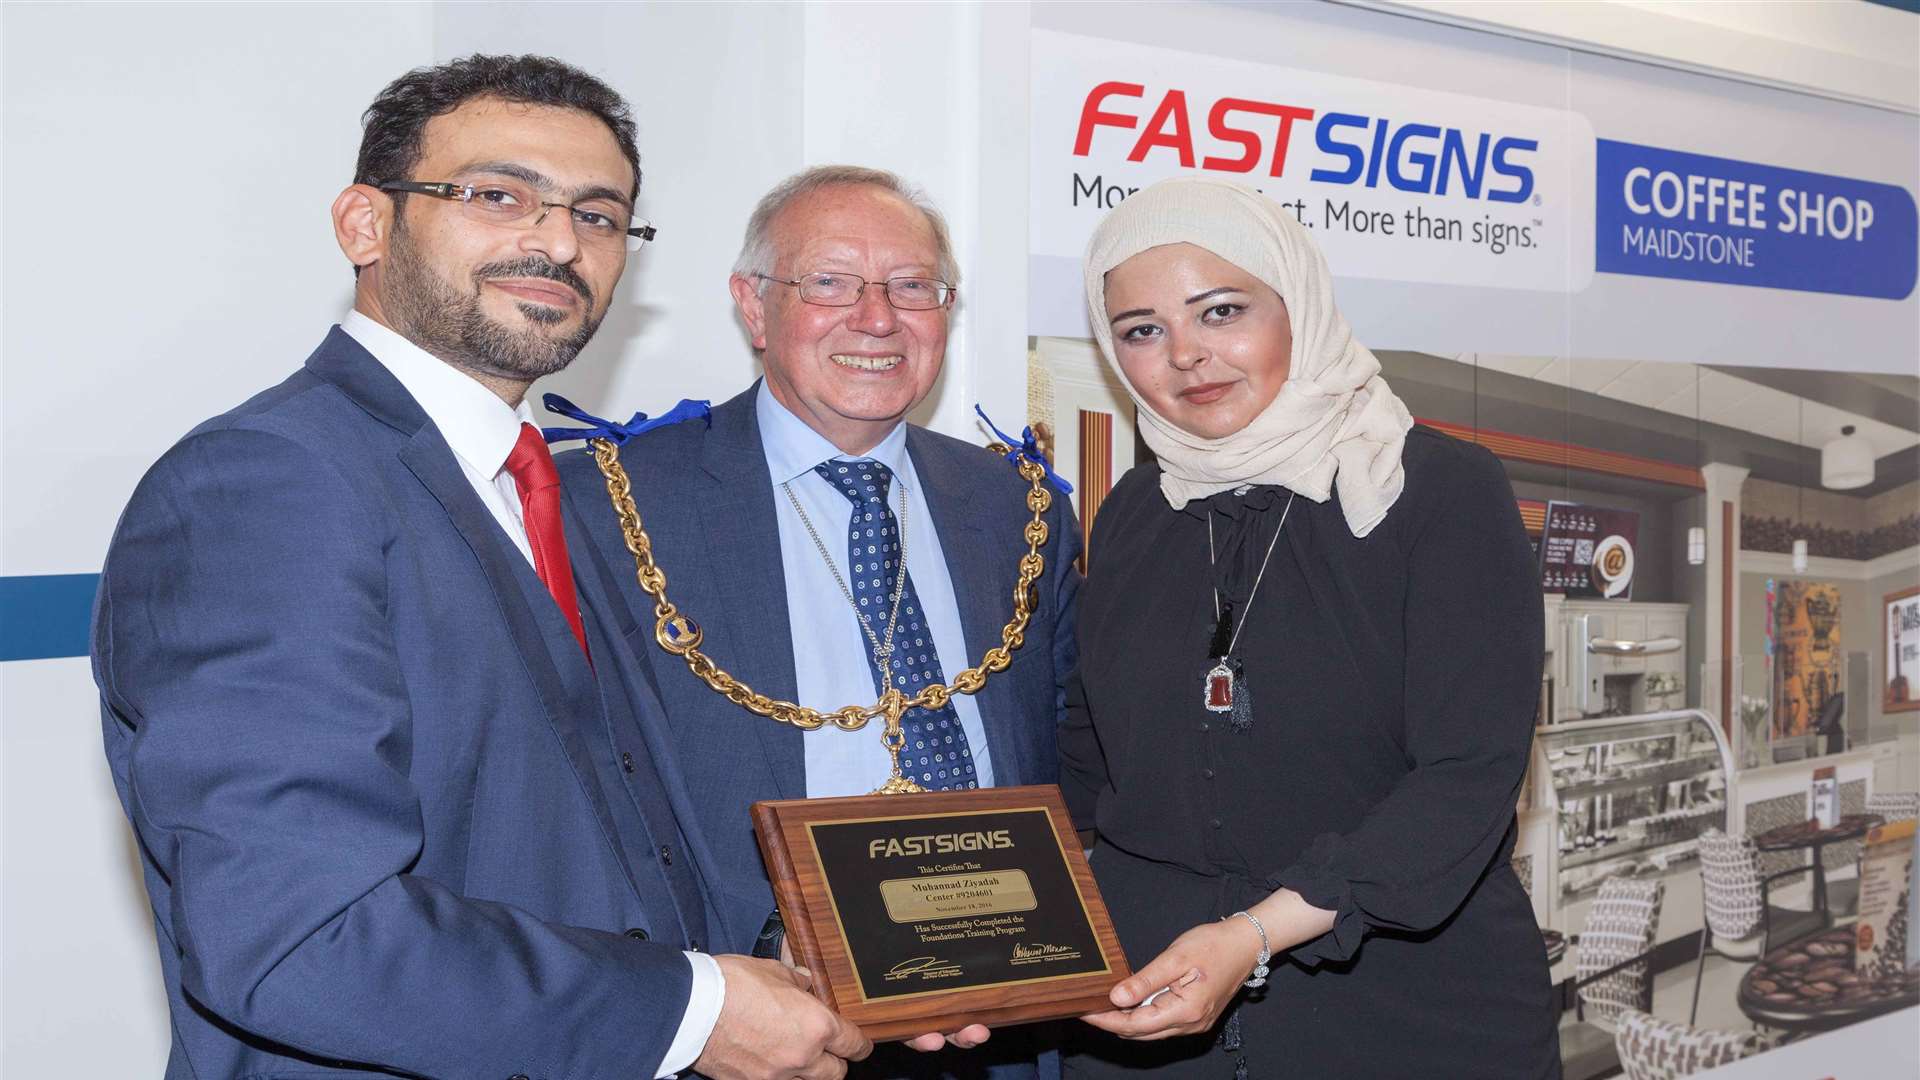 Muhannad Ziyadah, managing director of the new Maidstone centre, left, with his wife Basma and Cllr Derek Butler, the Mayor of Maidstone